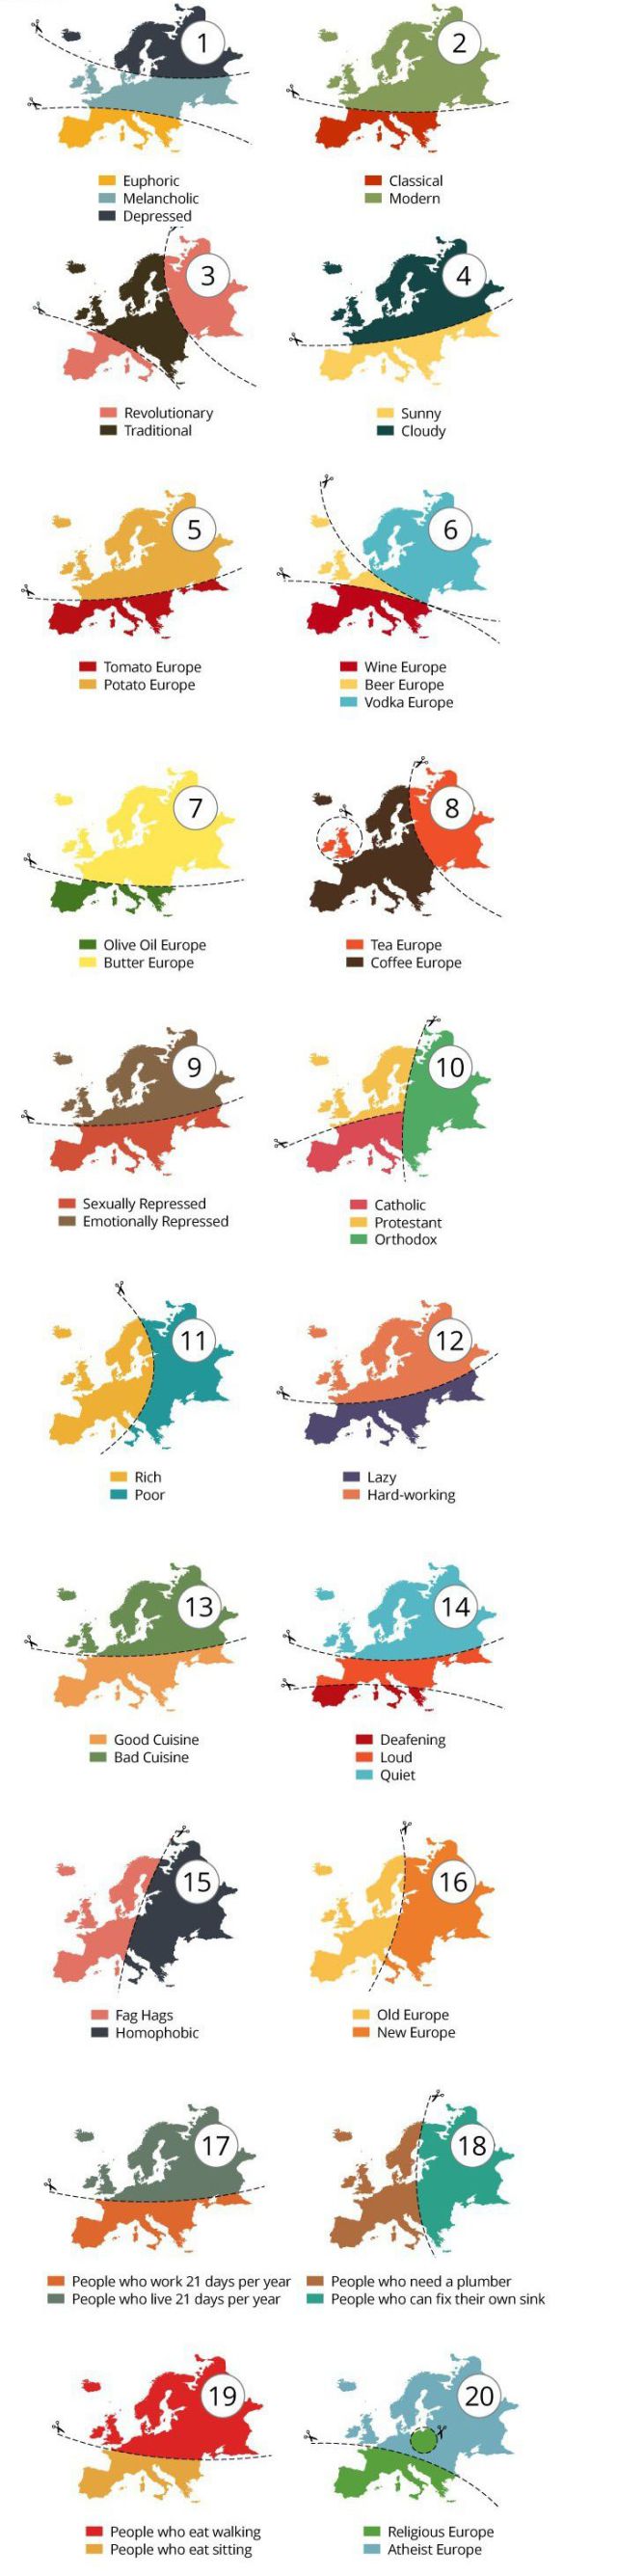 Europe Explained in Easy to Understand Pics